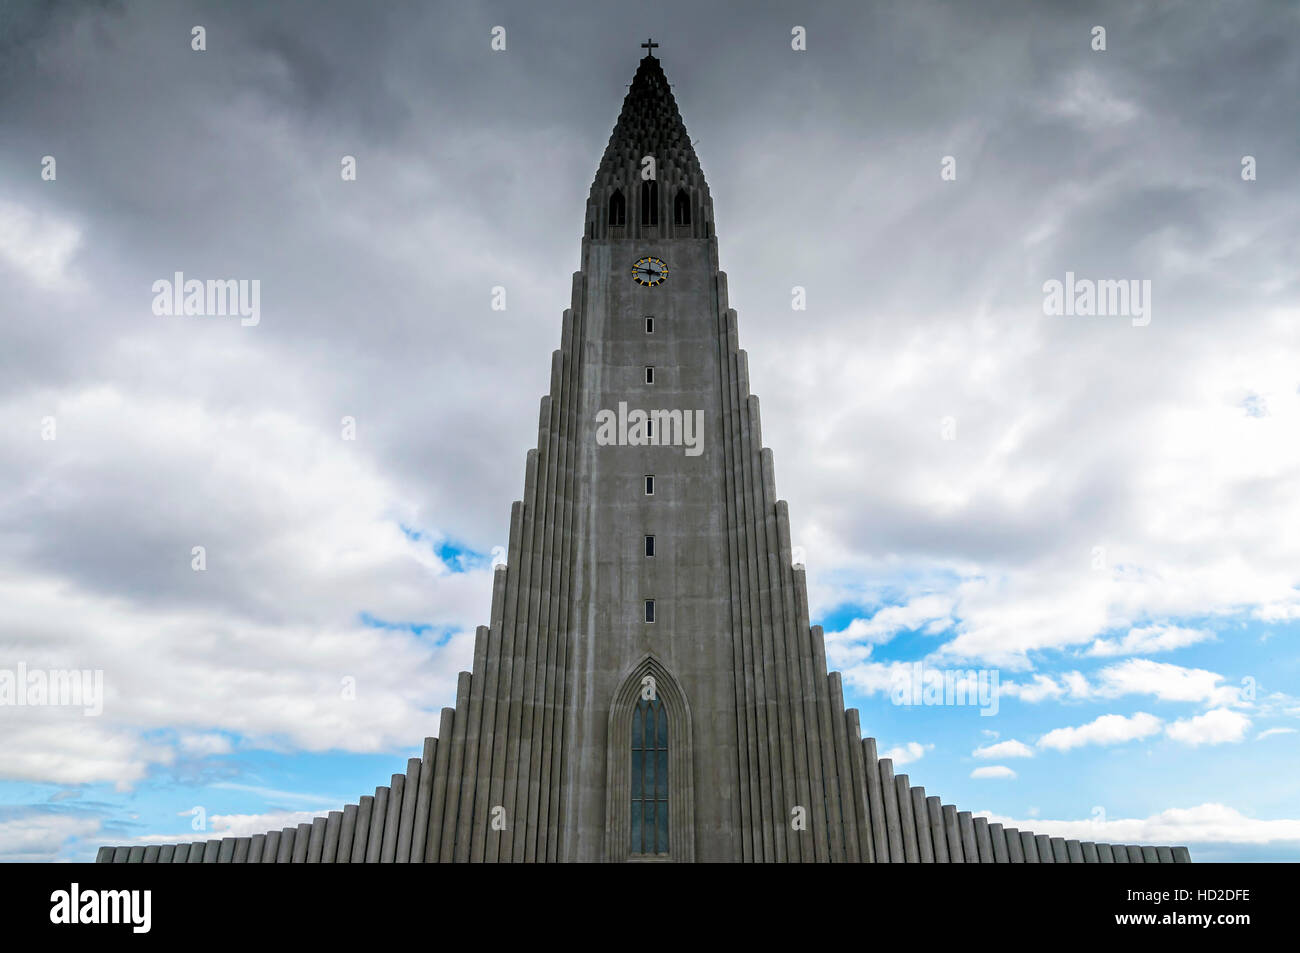 Reykjavik, Iceland - August 08, 2012: View of Hallgrimskirkja facade. This church of 73 metres is the largest in Iceland Stock Photo